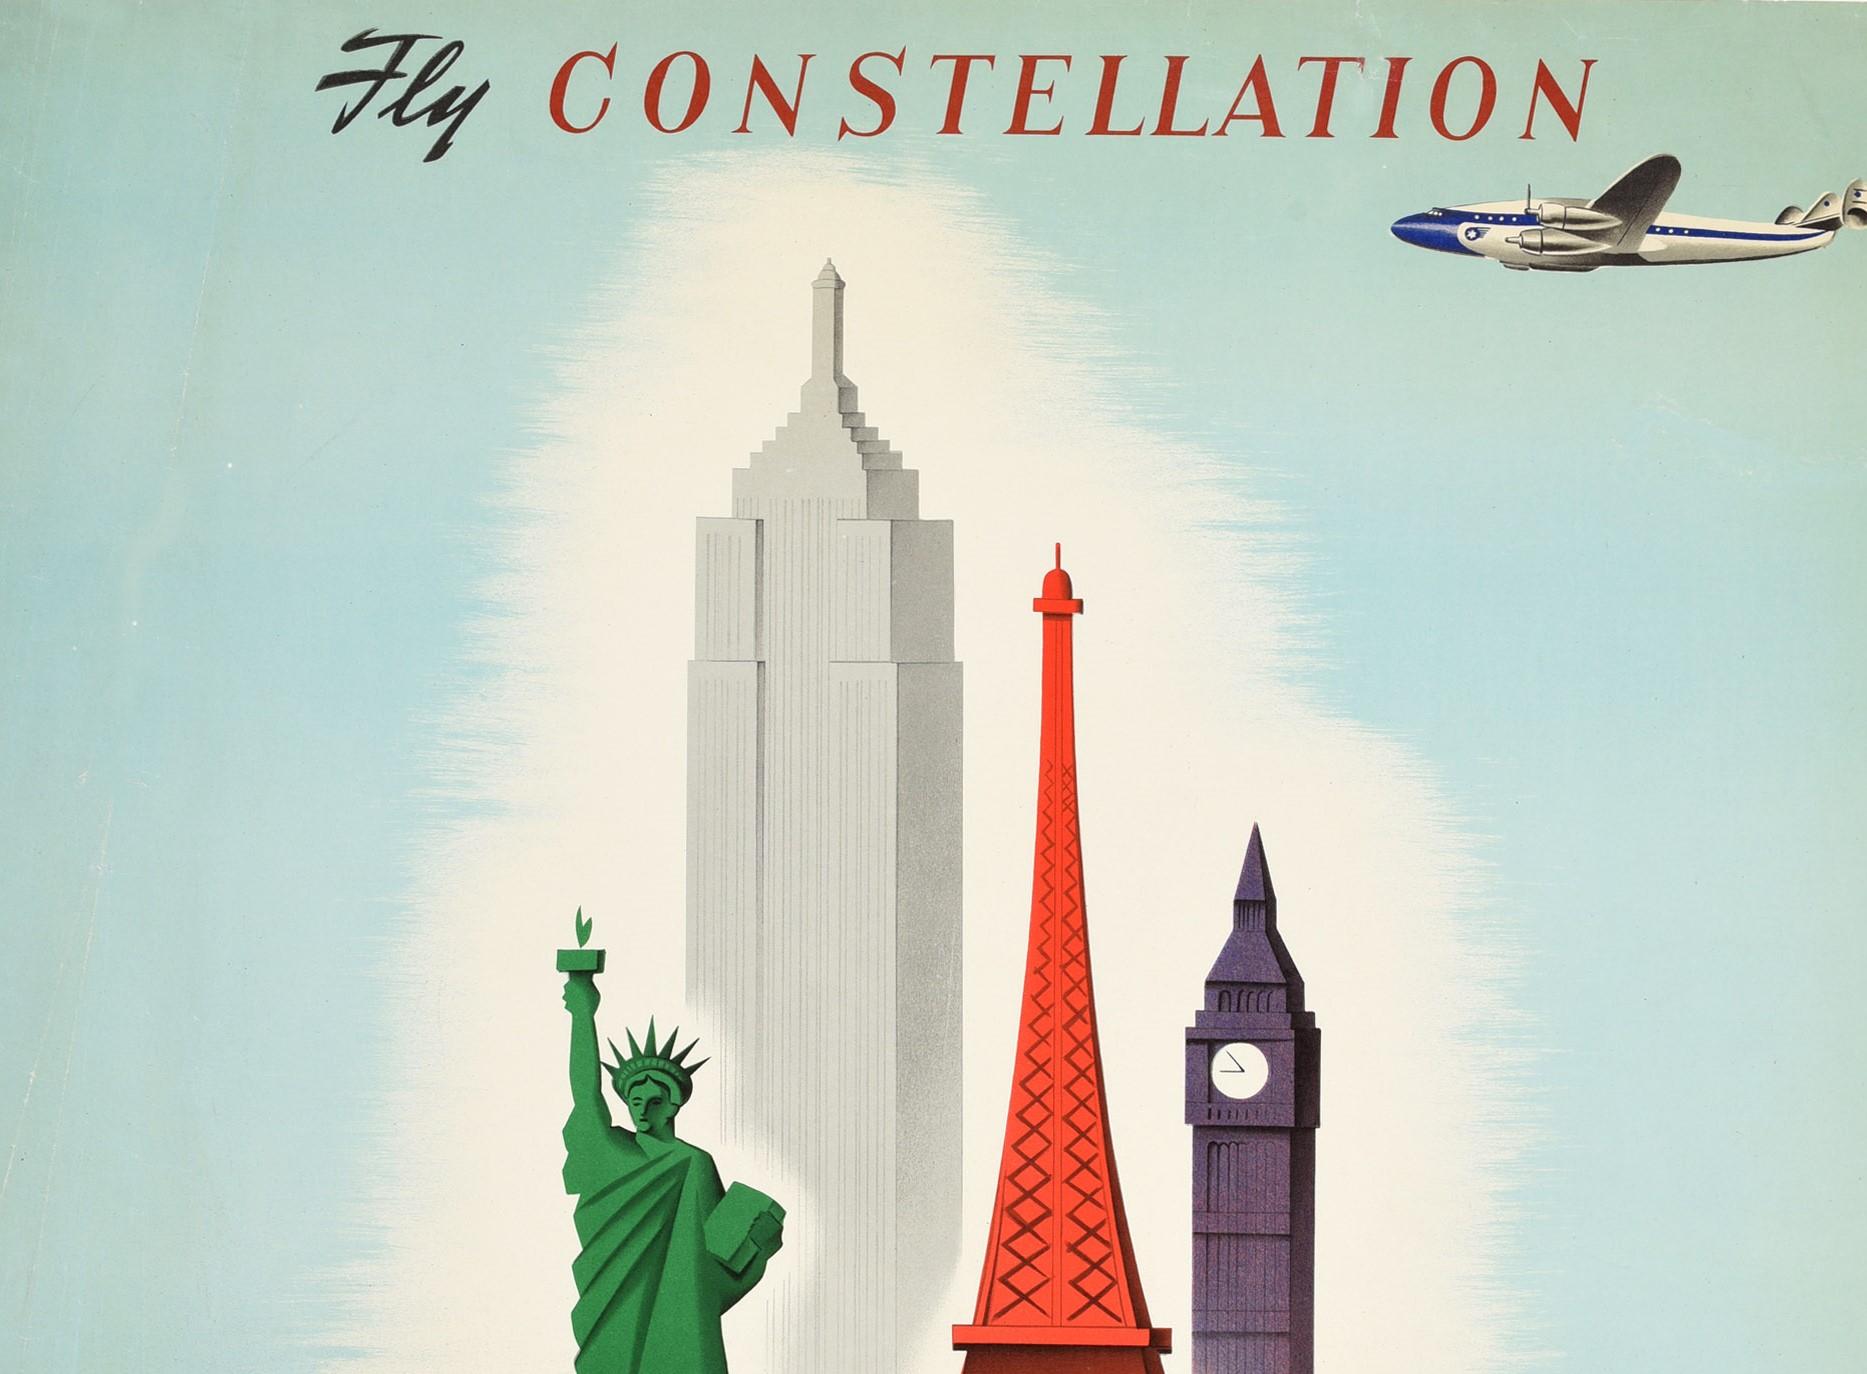 Original Vintage Poster Fly Constellation Four Continents El Al Israel Airlines - Print by Franz Krausz